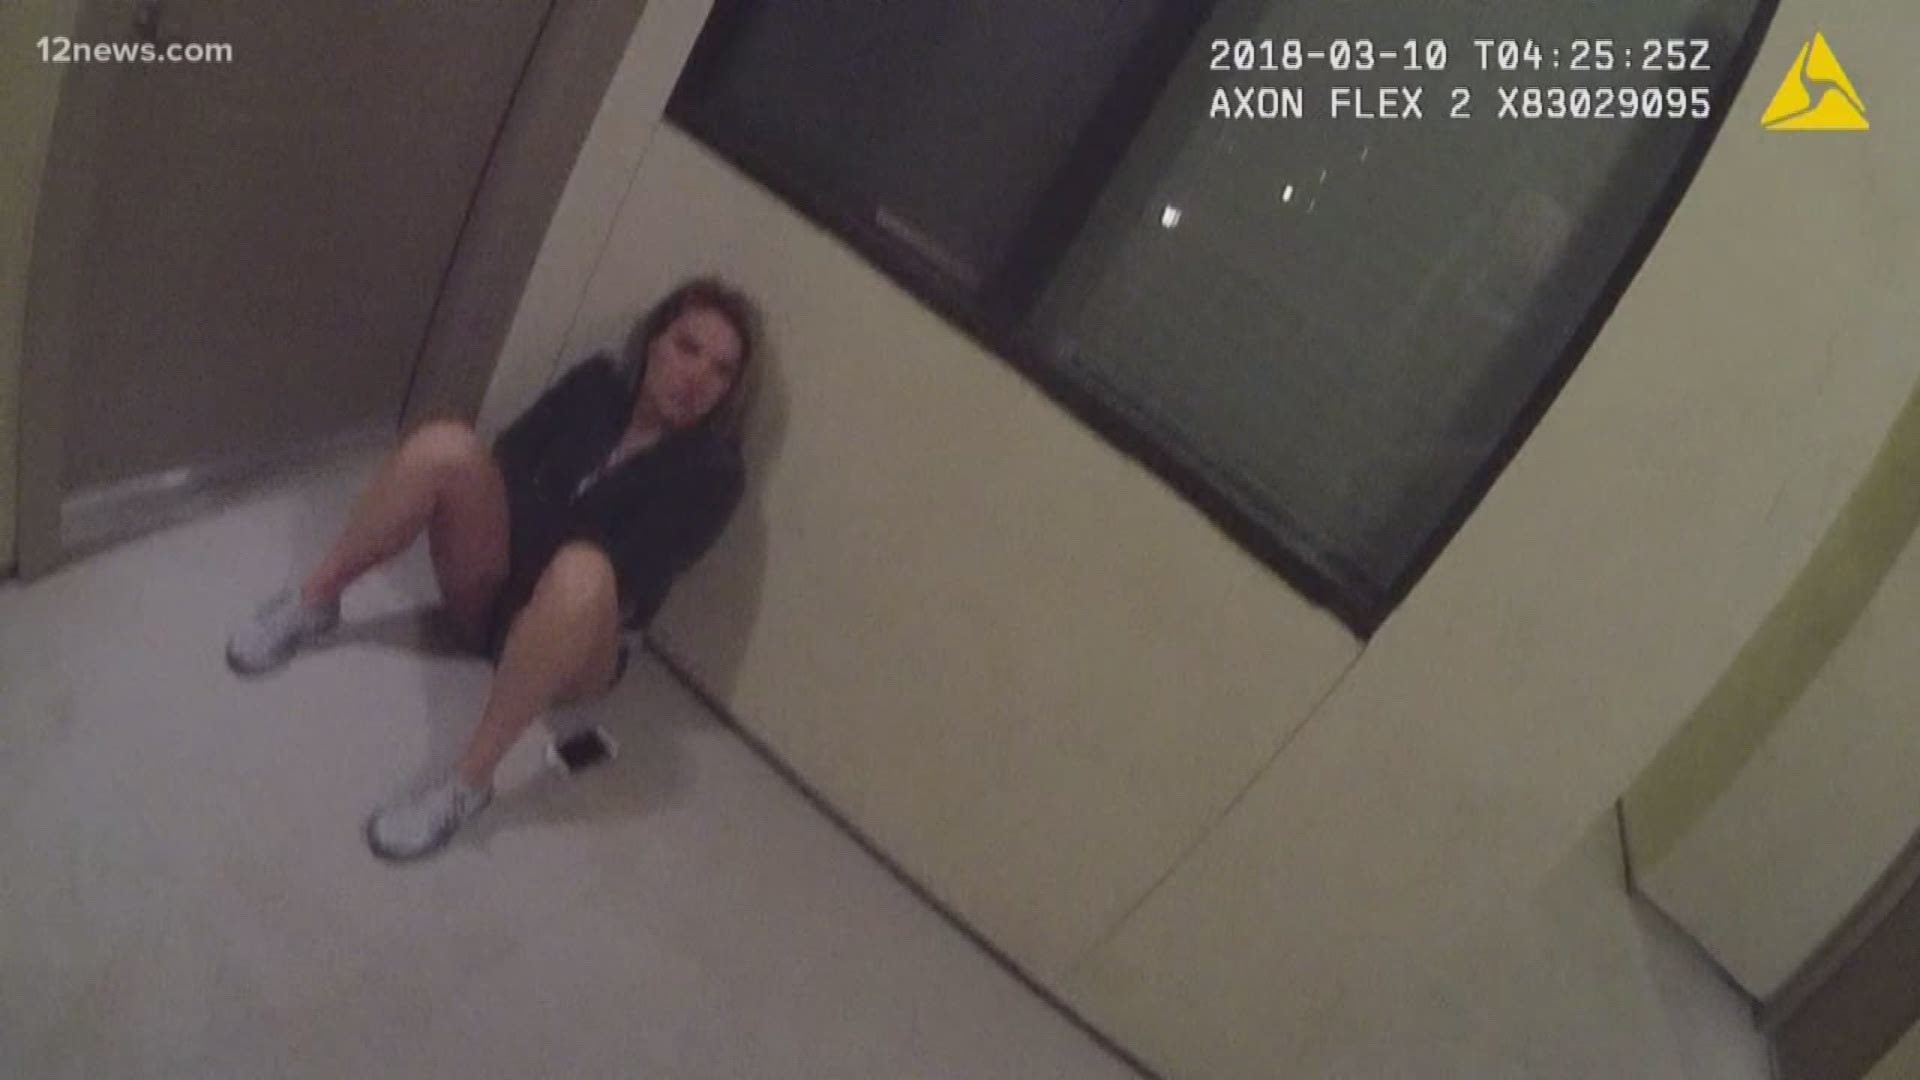 Woman sues Gilbert police after being slammed face-first onto cement during arrest 12news pic